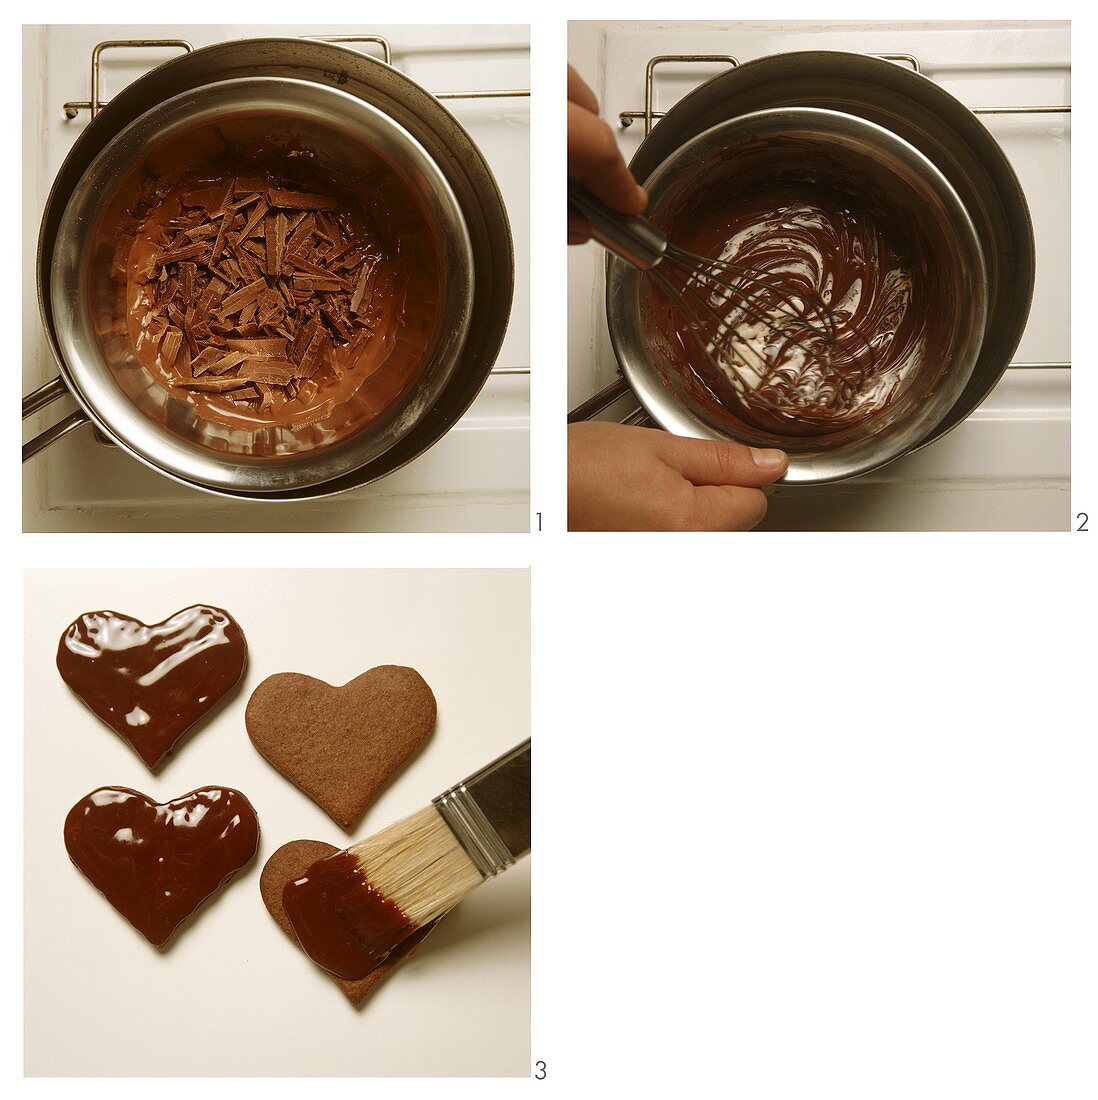 Coating biscuits in chocolate